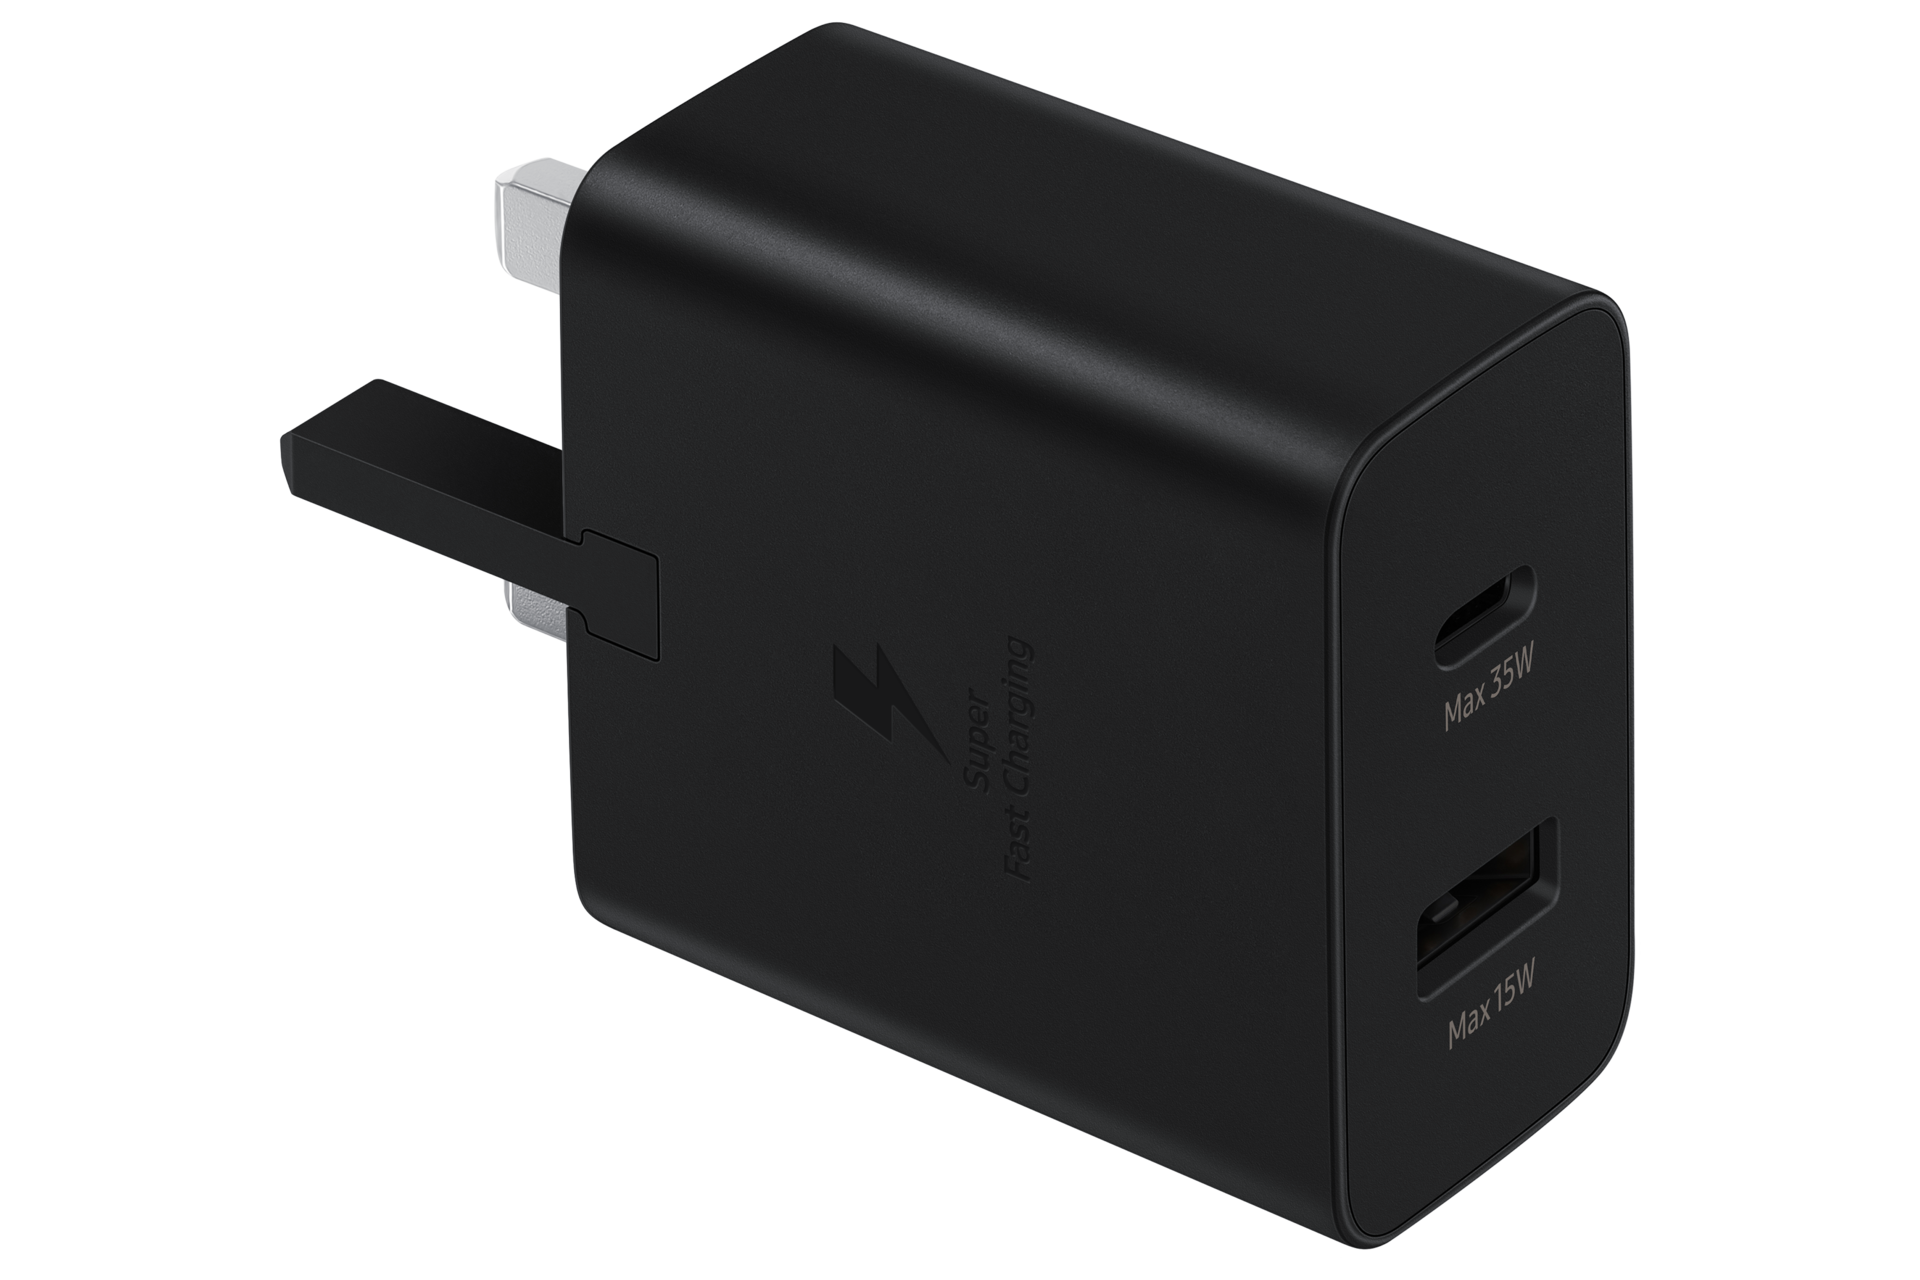 35W Duo USB Charger Plug Power Adapter ep-ta220nbeggb